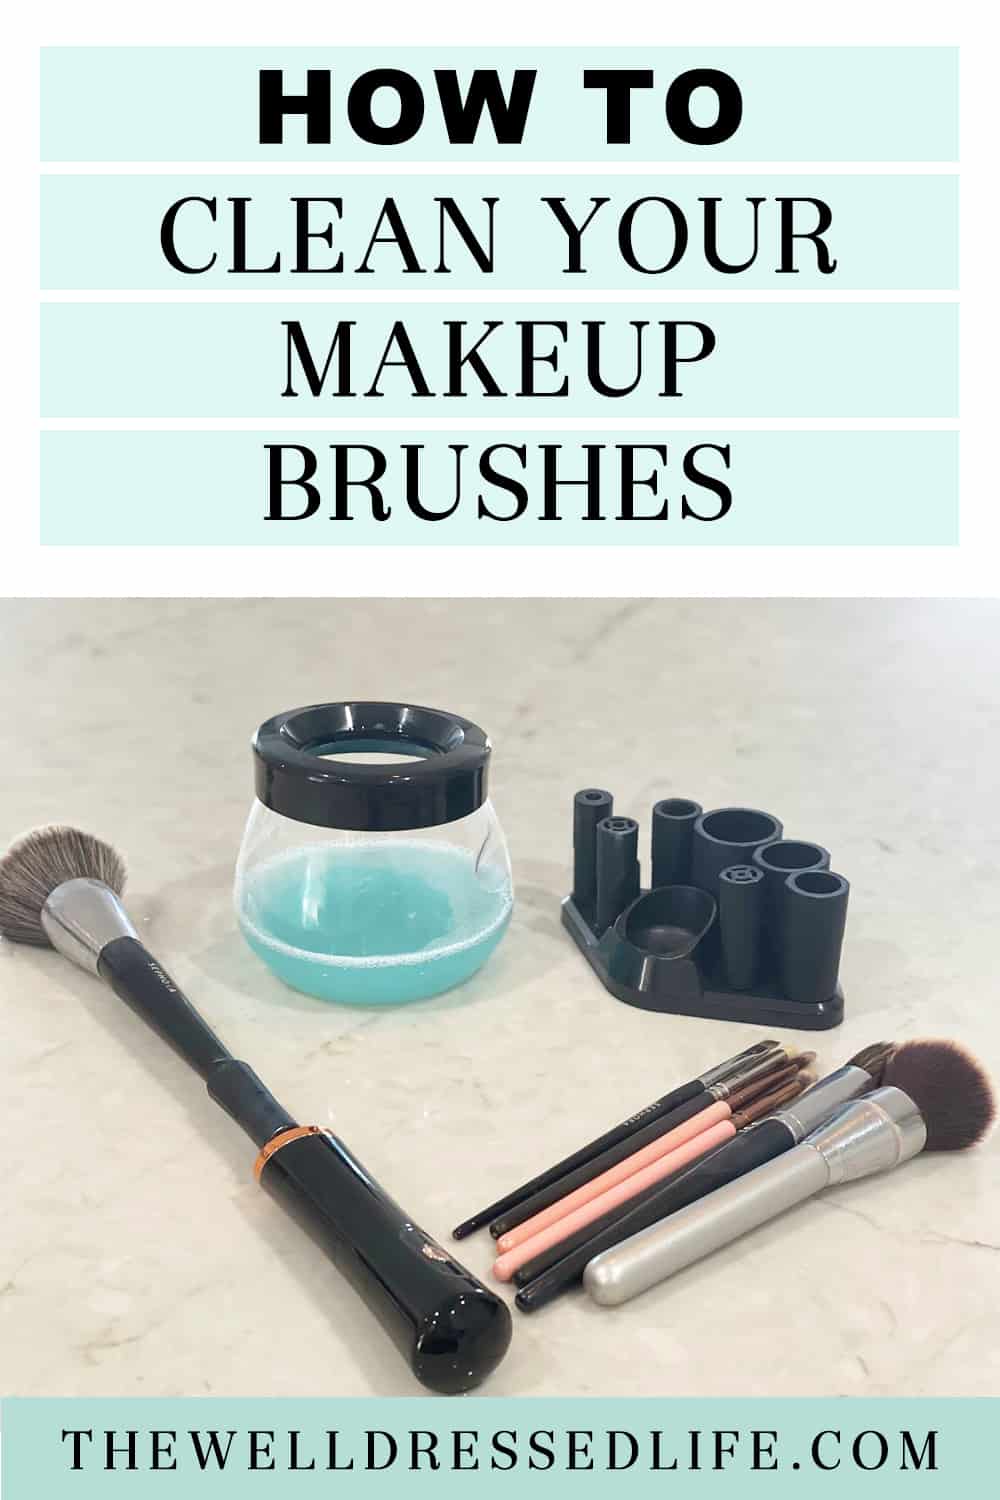 How to Clean Your Make-Up Brushes